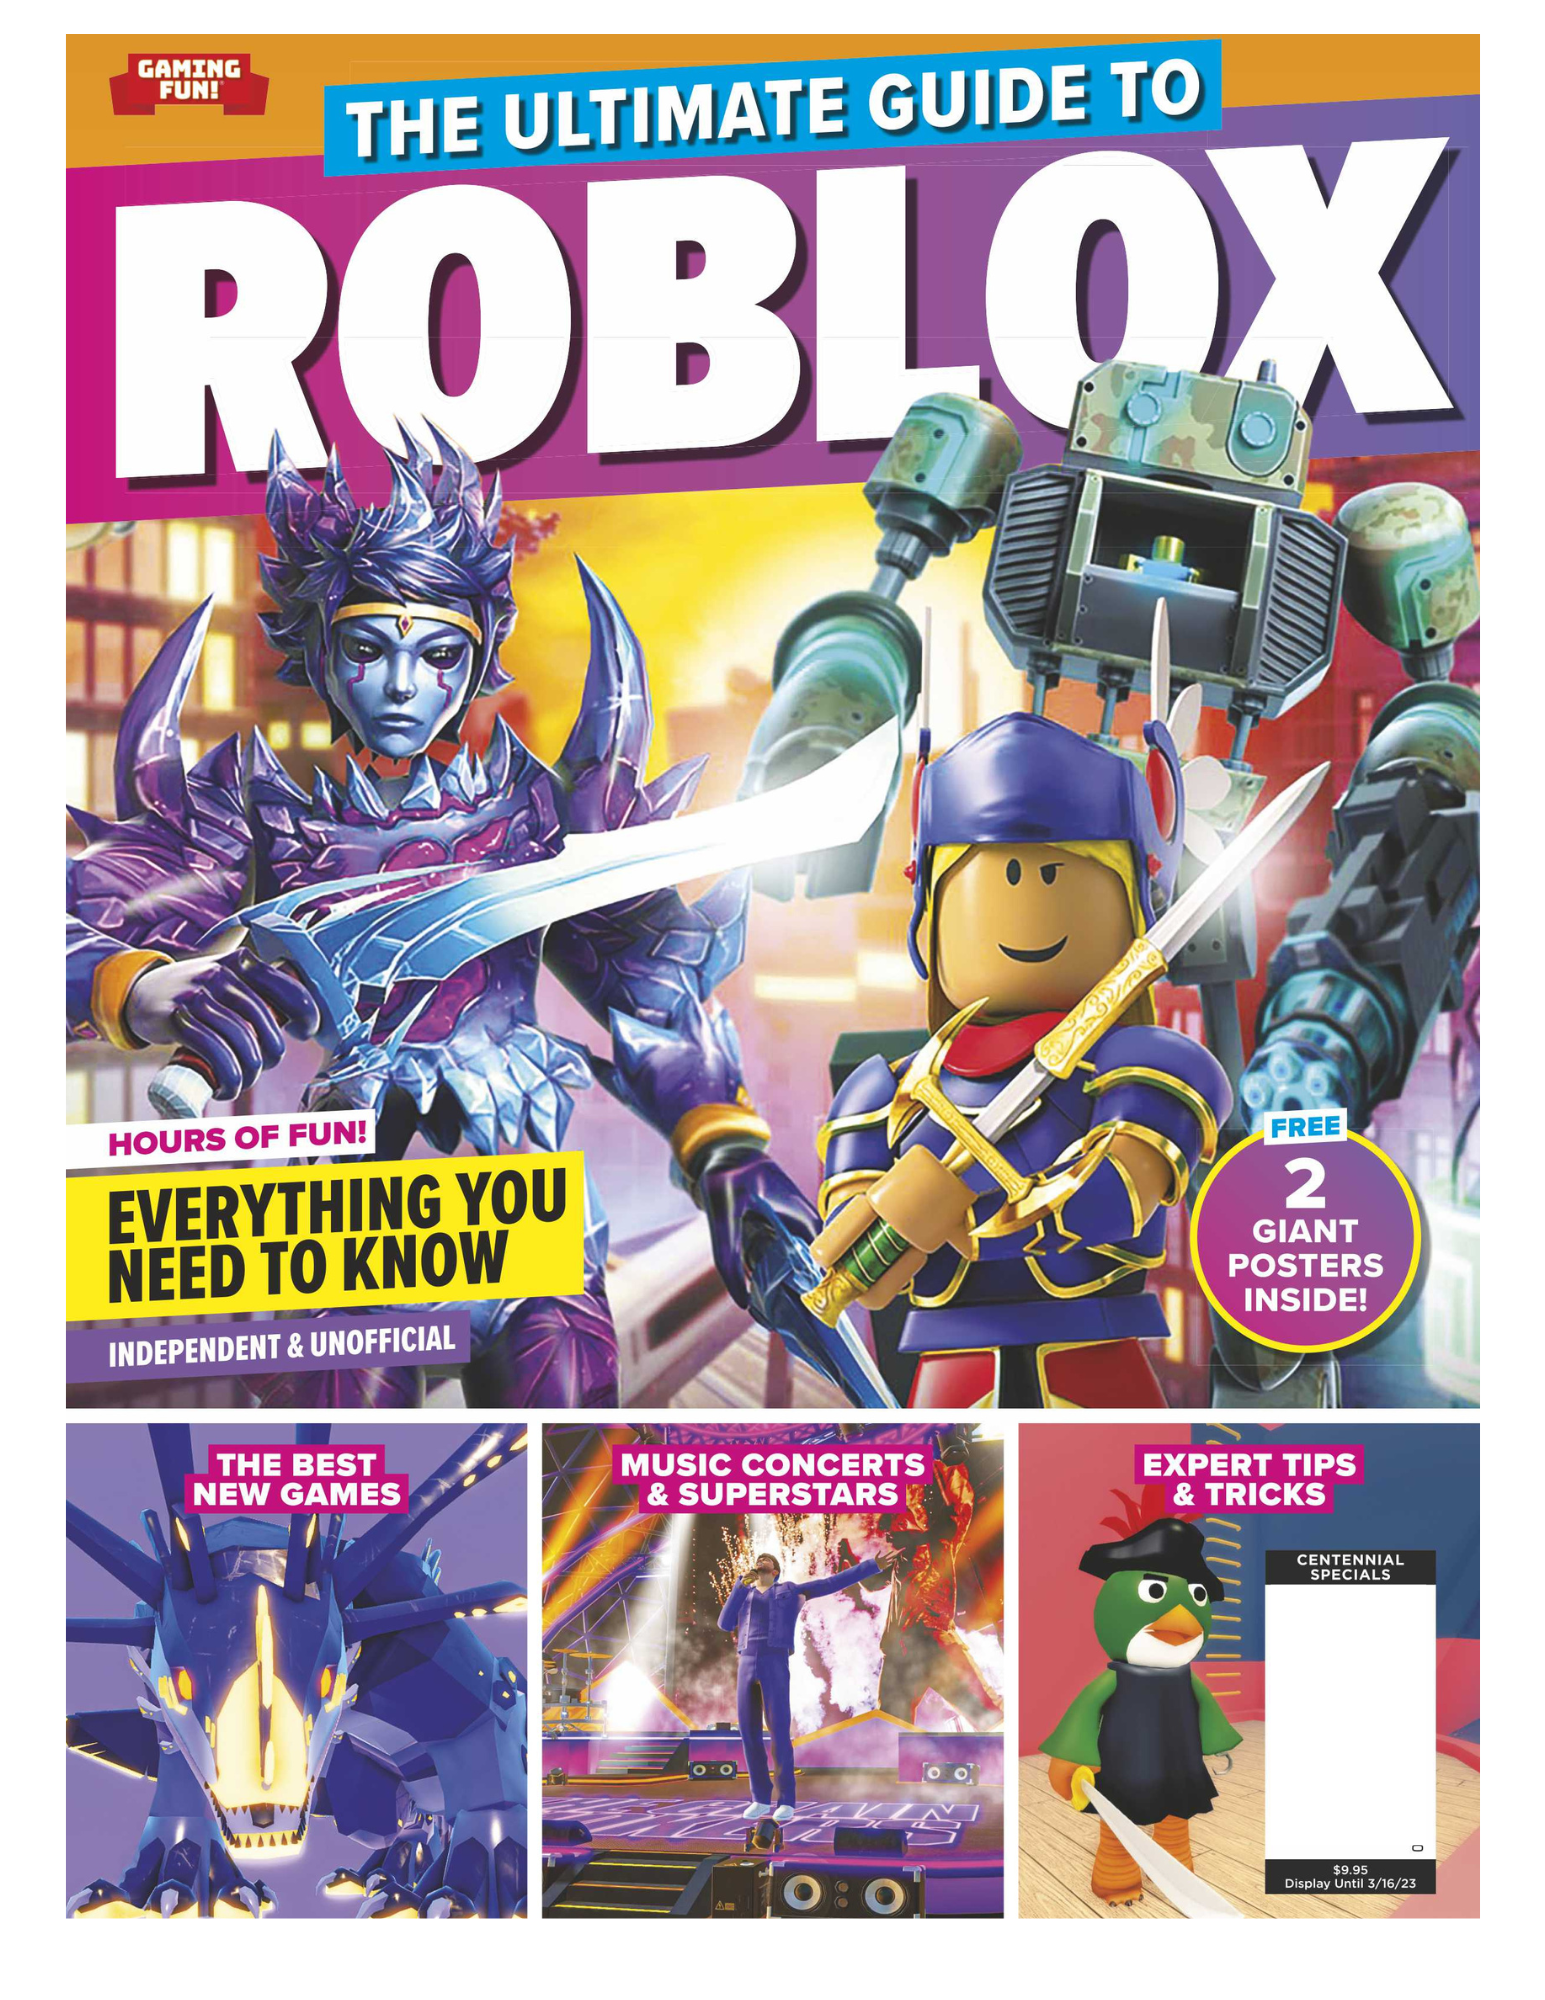 A quick guide to Roblox, for adults – AKA the latest 'next